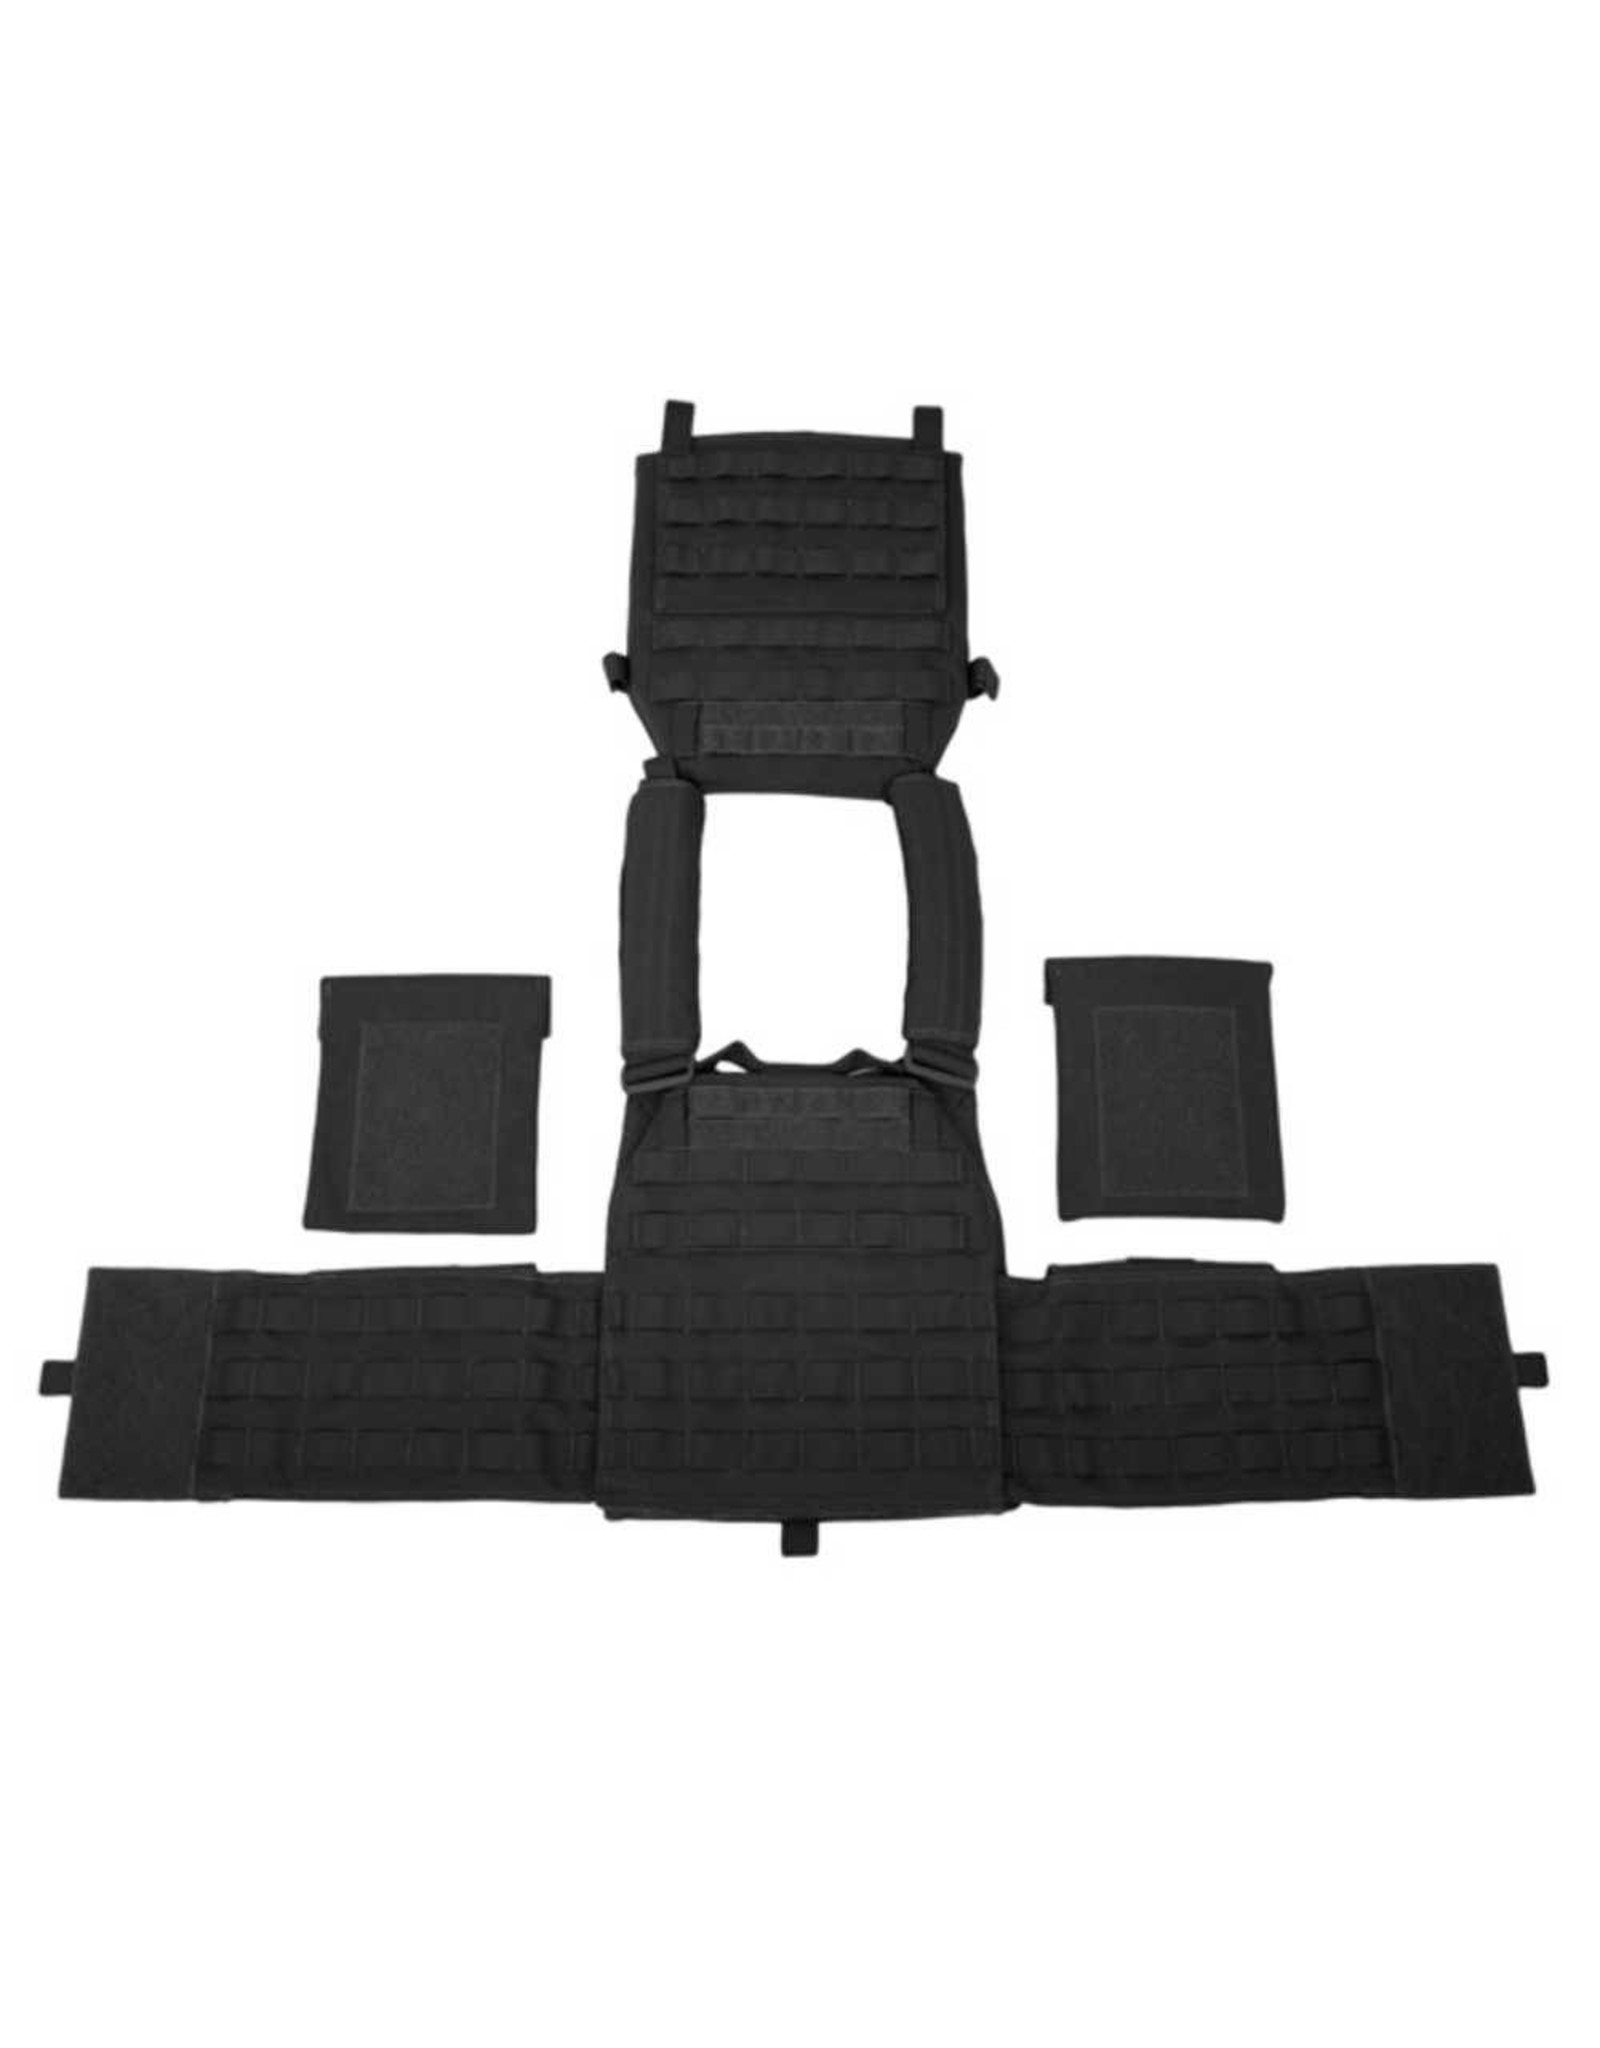 Warrior DCS Special Forces Plate Carrier Base - Black